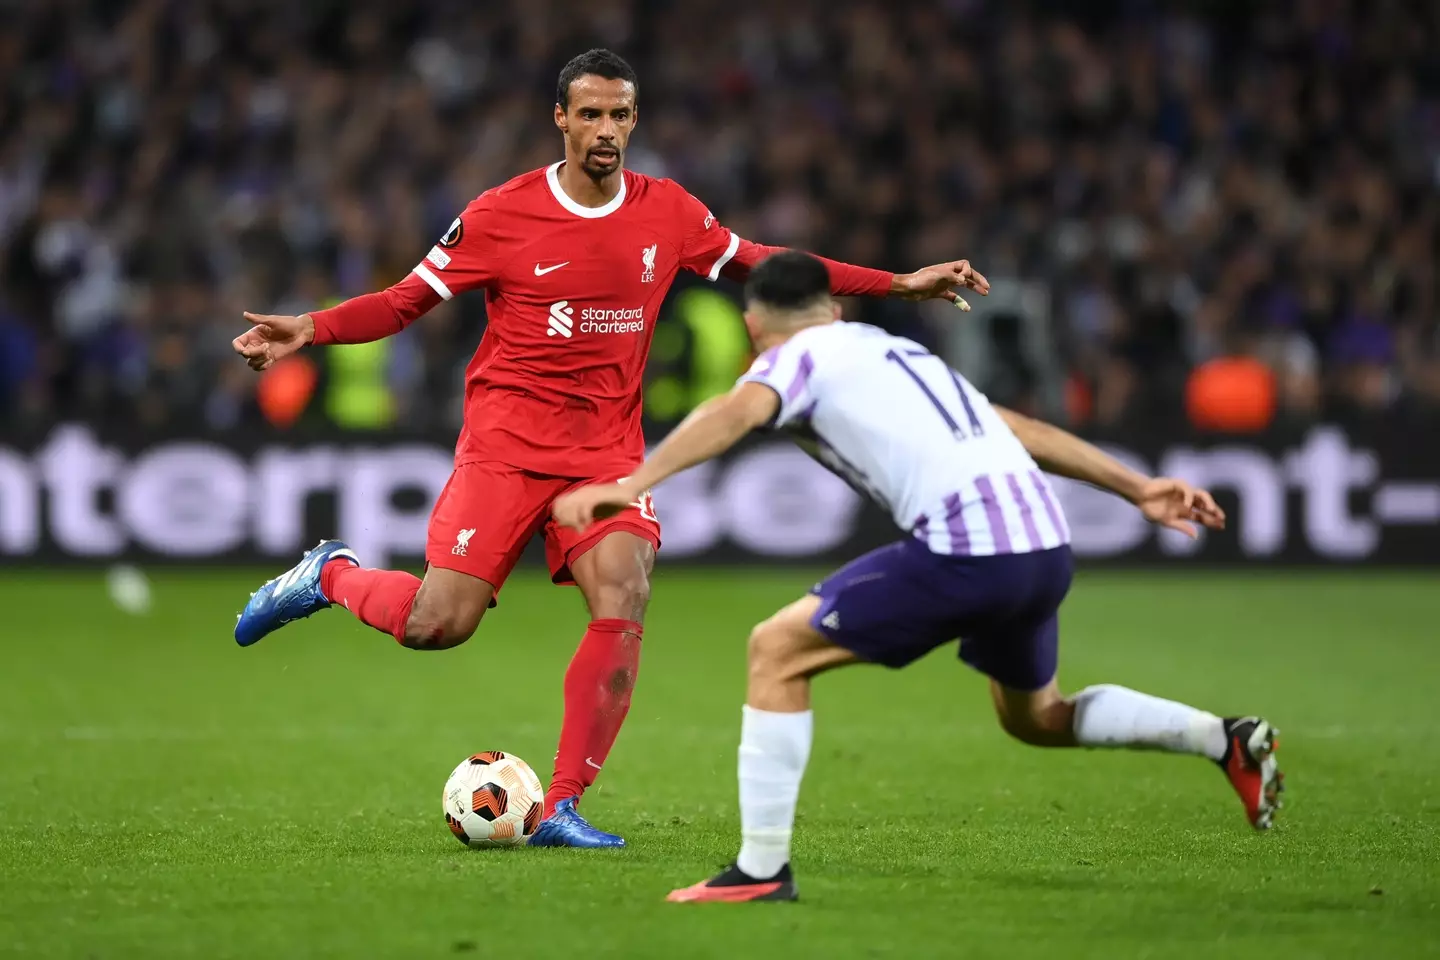 Joel Matip in action for Liverpool in the Europa League. Image: Getty